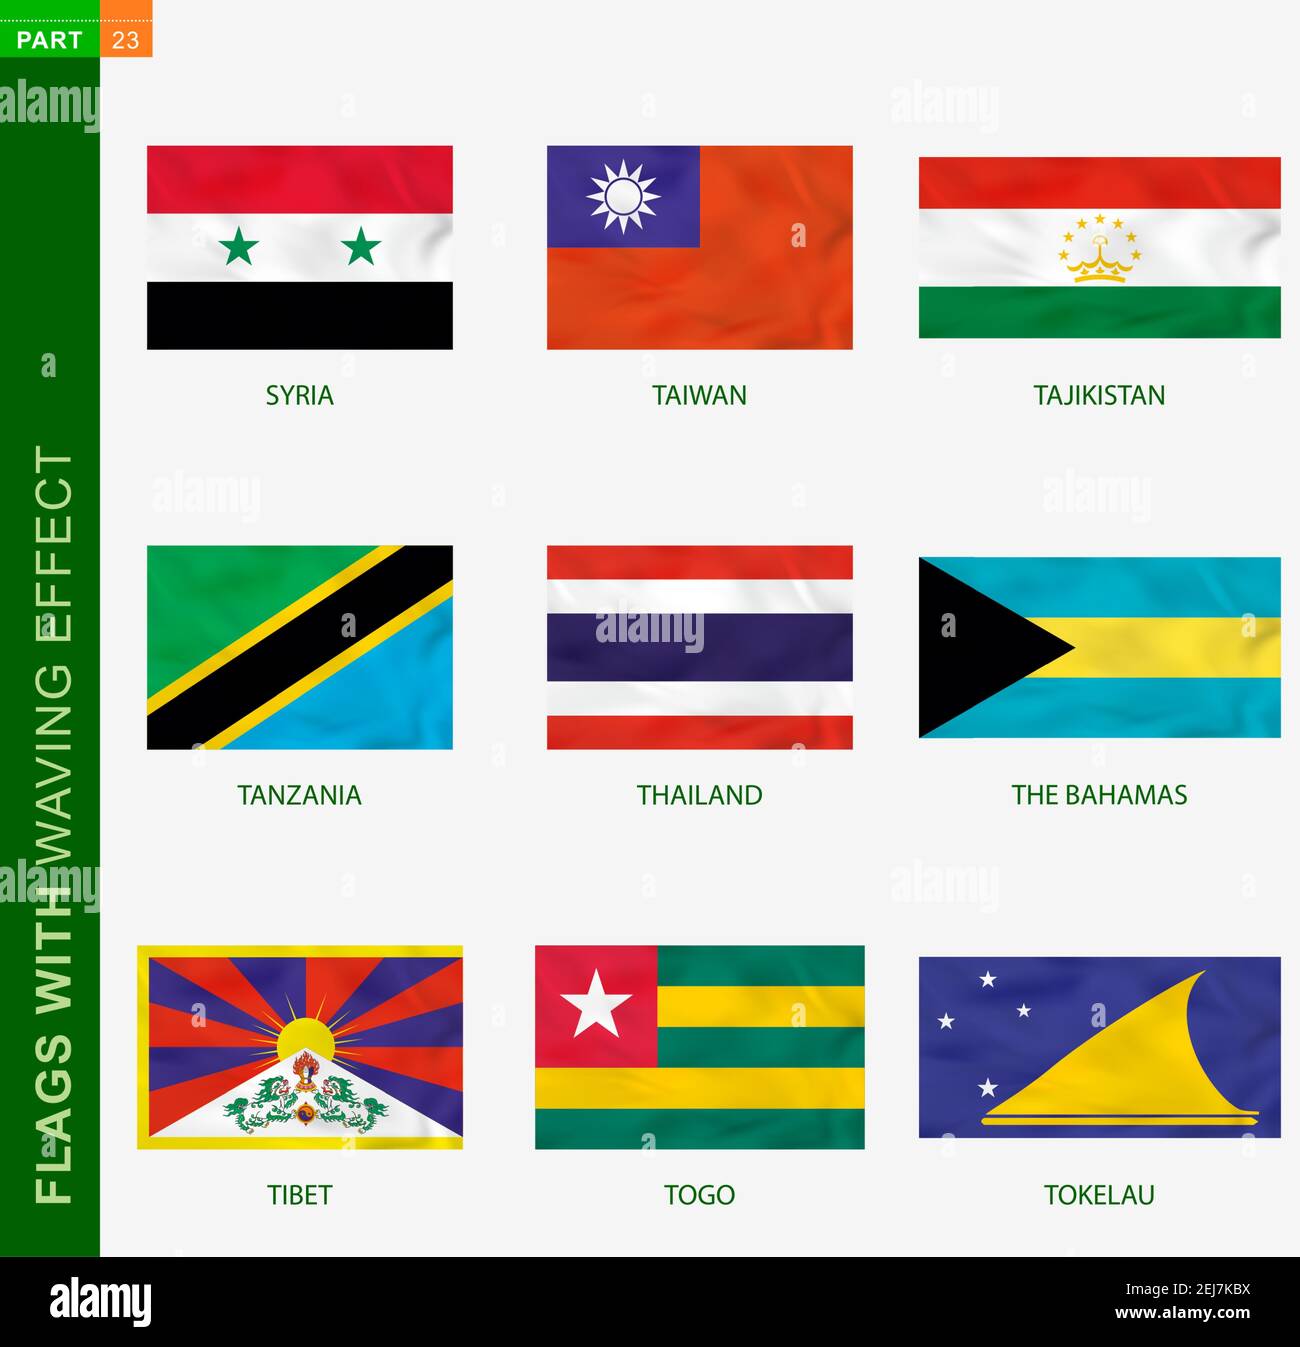 Set of flag with waving effect, national flag with texture. Vector flag of Syria, Taiwan, Tajikistan, Tanzania, Thailand, The Bahamas, Tibet, Togo, To Stock Vector